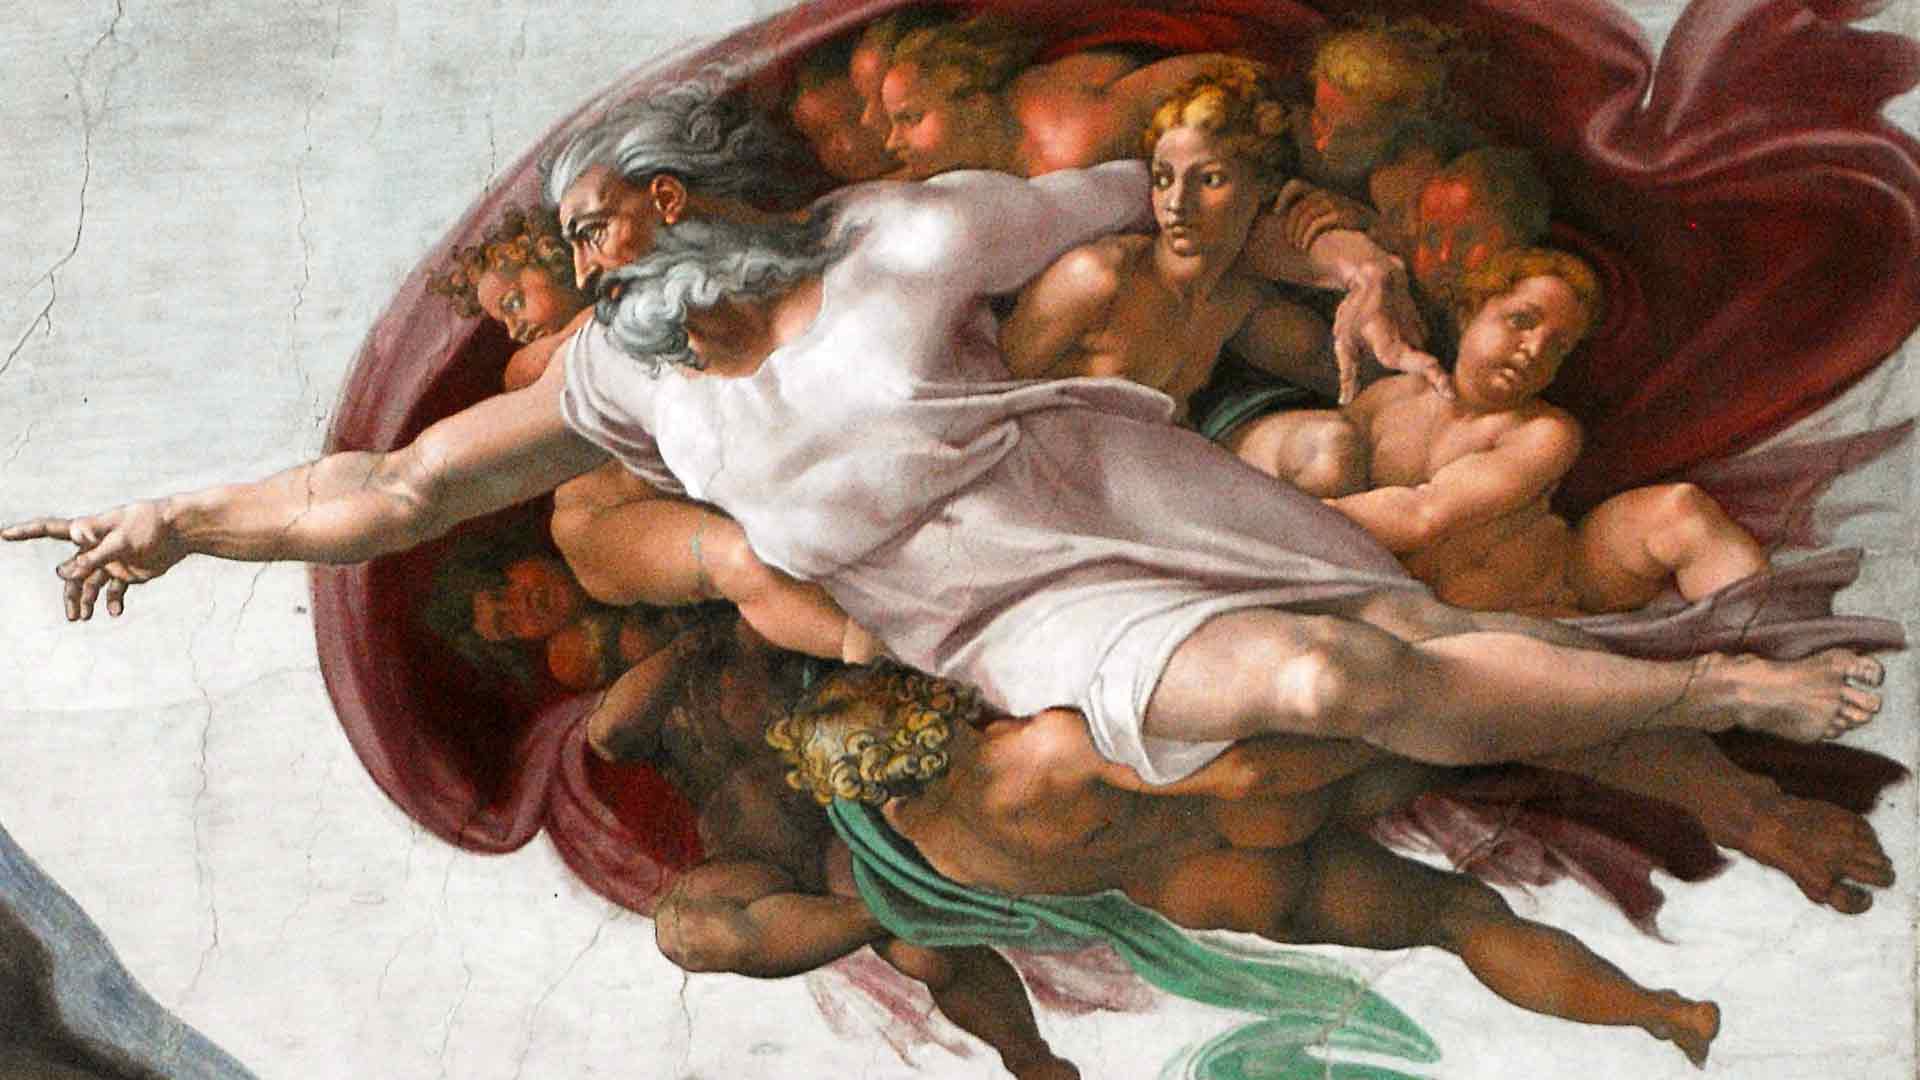 Sistine Chapel ceiling fresco with detail of God in The Creation of Adam, c.1508-12, 
		by Michelangelo at the Vatican Museums in Rome, Italy. (CC0 1.0)